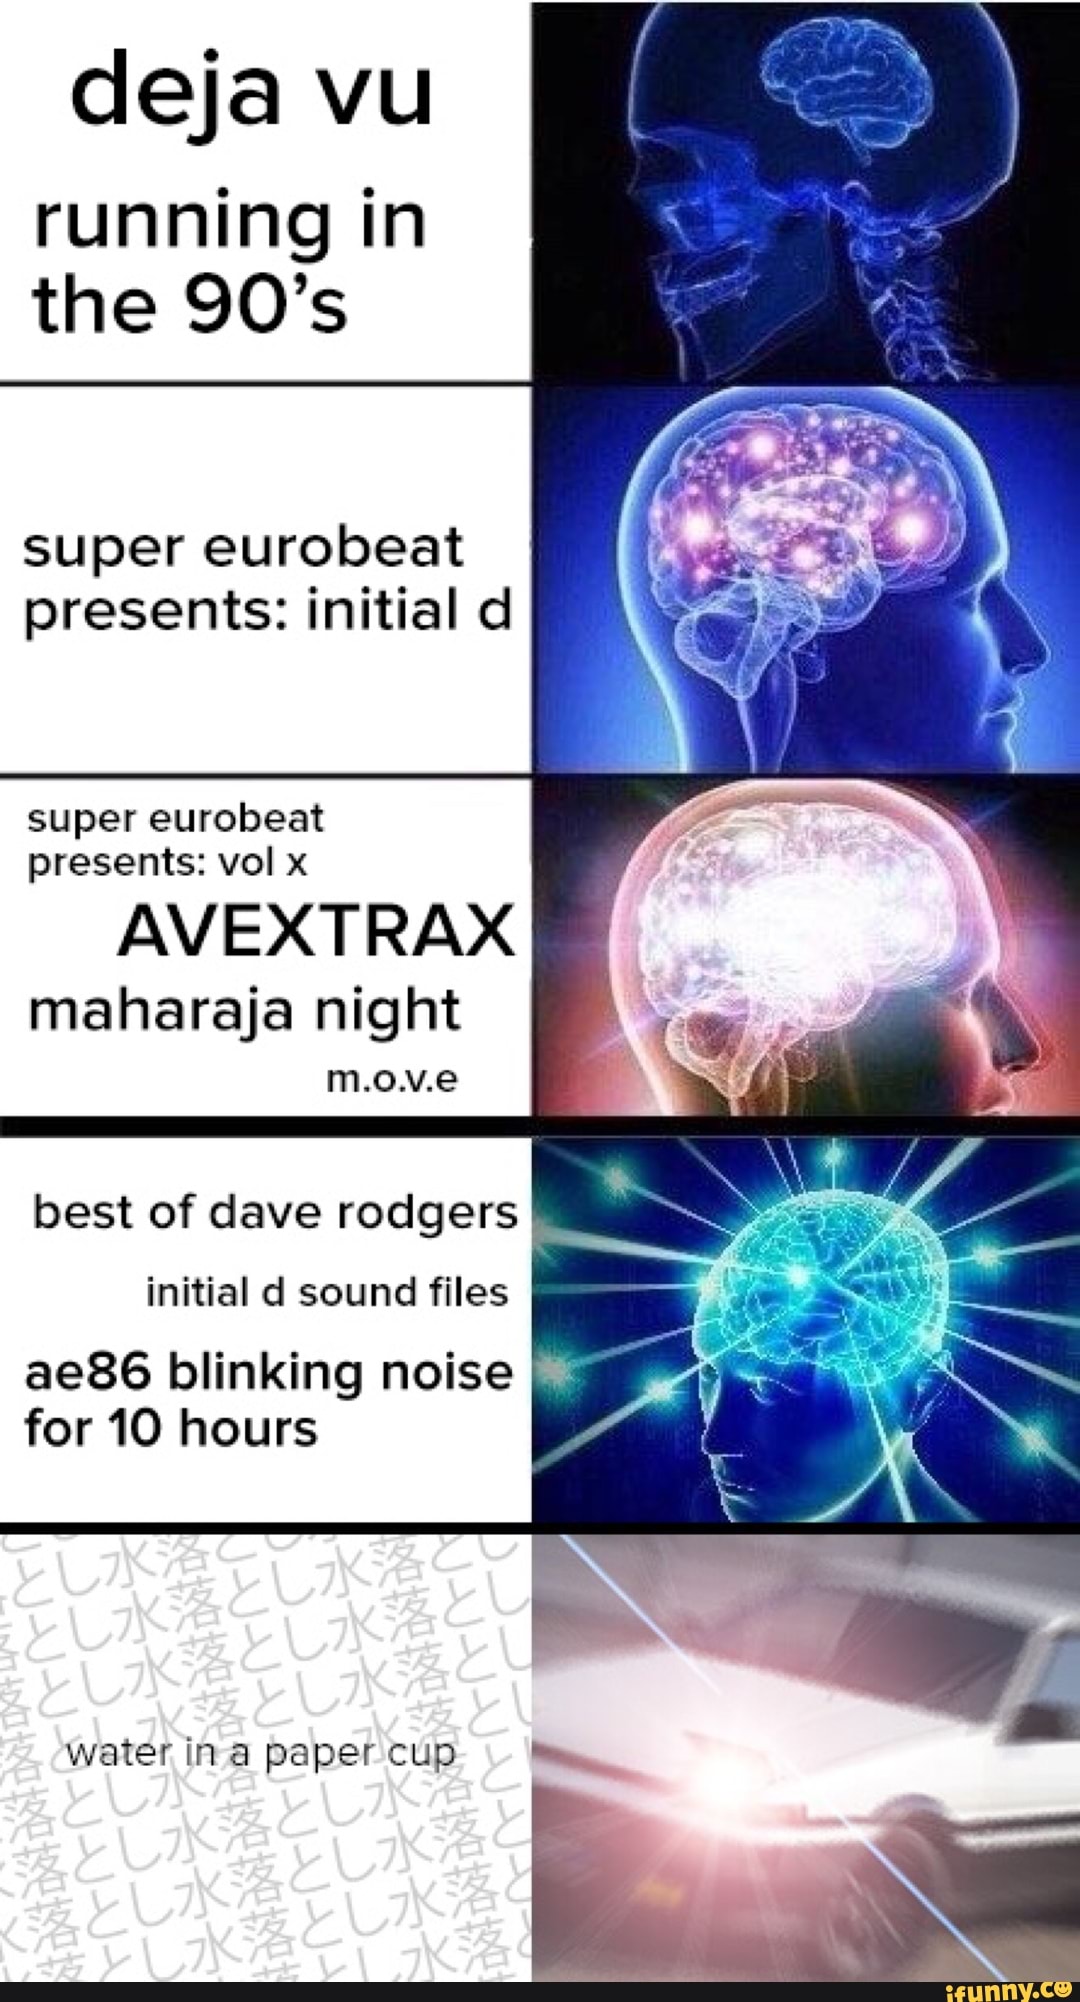 Daavu Running In The 90 S Super Eurobeat Presents Initial D Super Eurobeat Presents Vol X Avext Rax Maharaja Night Best Of Dave Rodgers Initial D Sound Files Ae86 Blinking Noise For